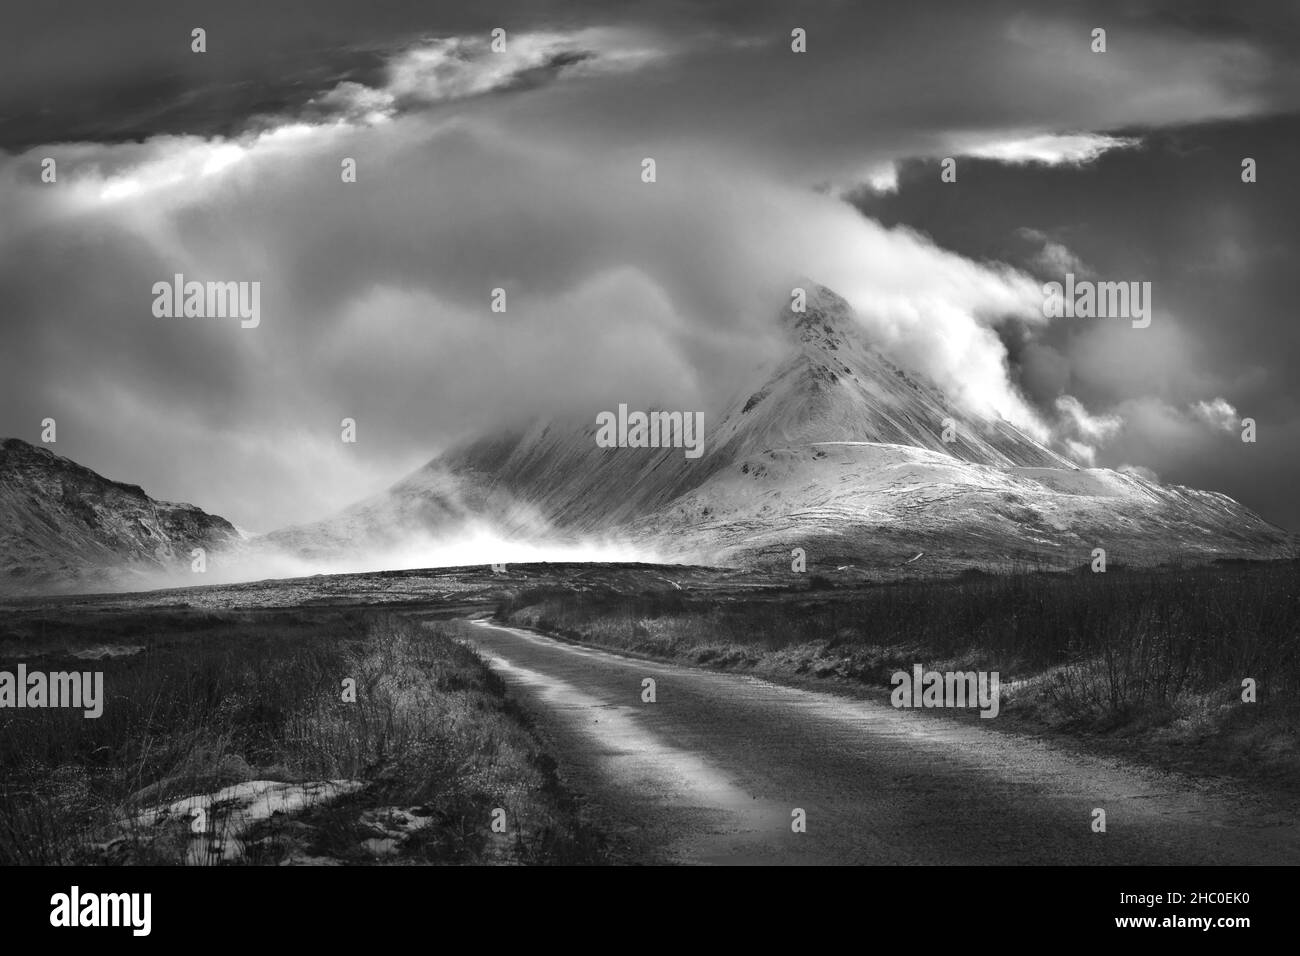 The snow-capped Mount Errigal shrouded in storm clouds. The Errigal peak in west Donegal is a popular spot for tourists and mountain climbers. Stock Photo